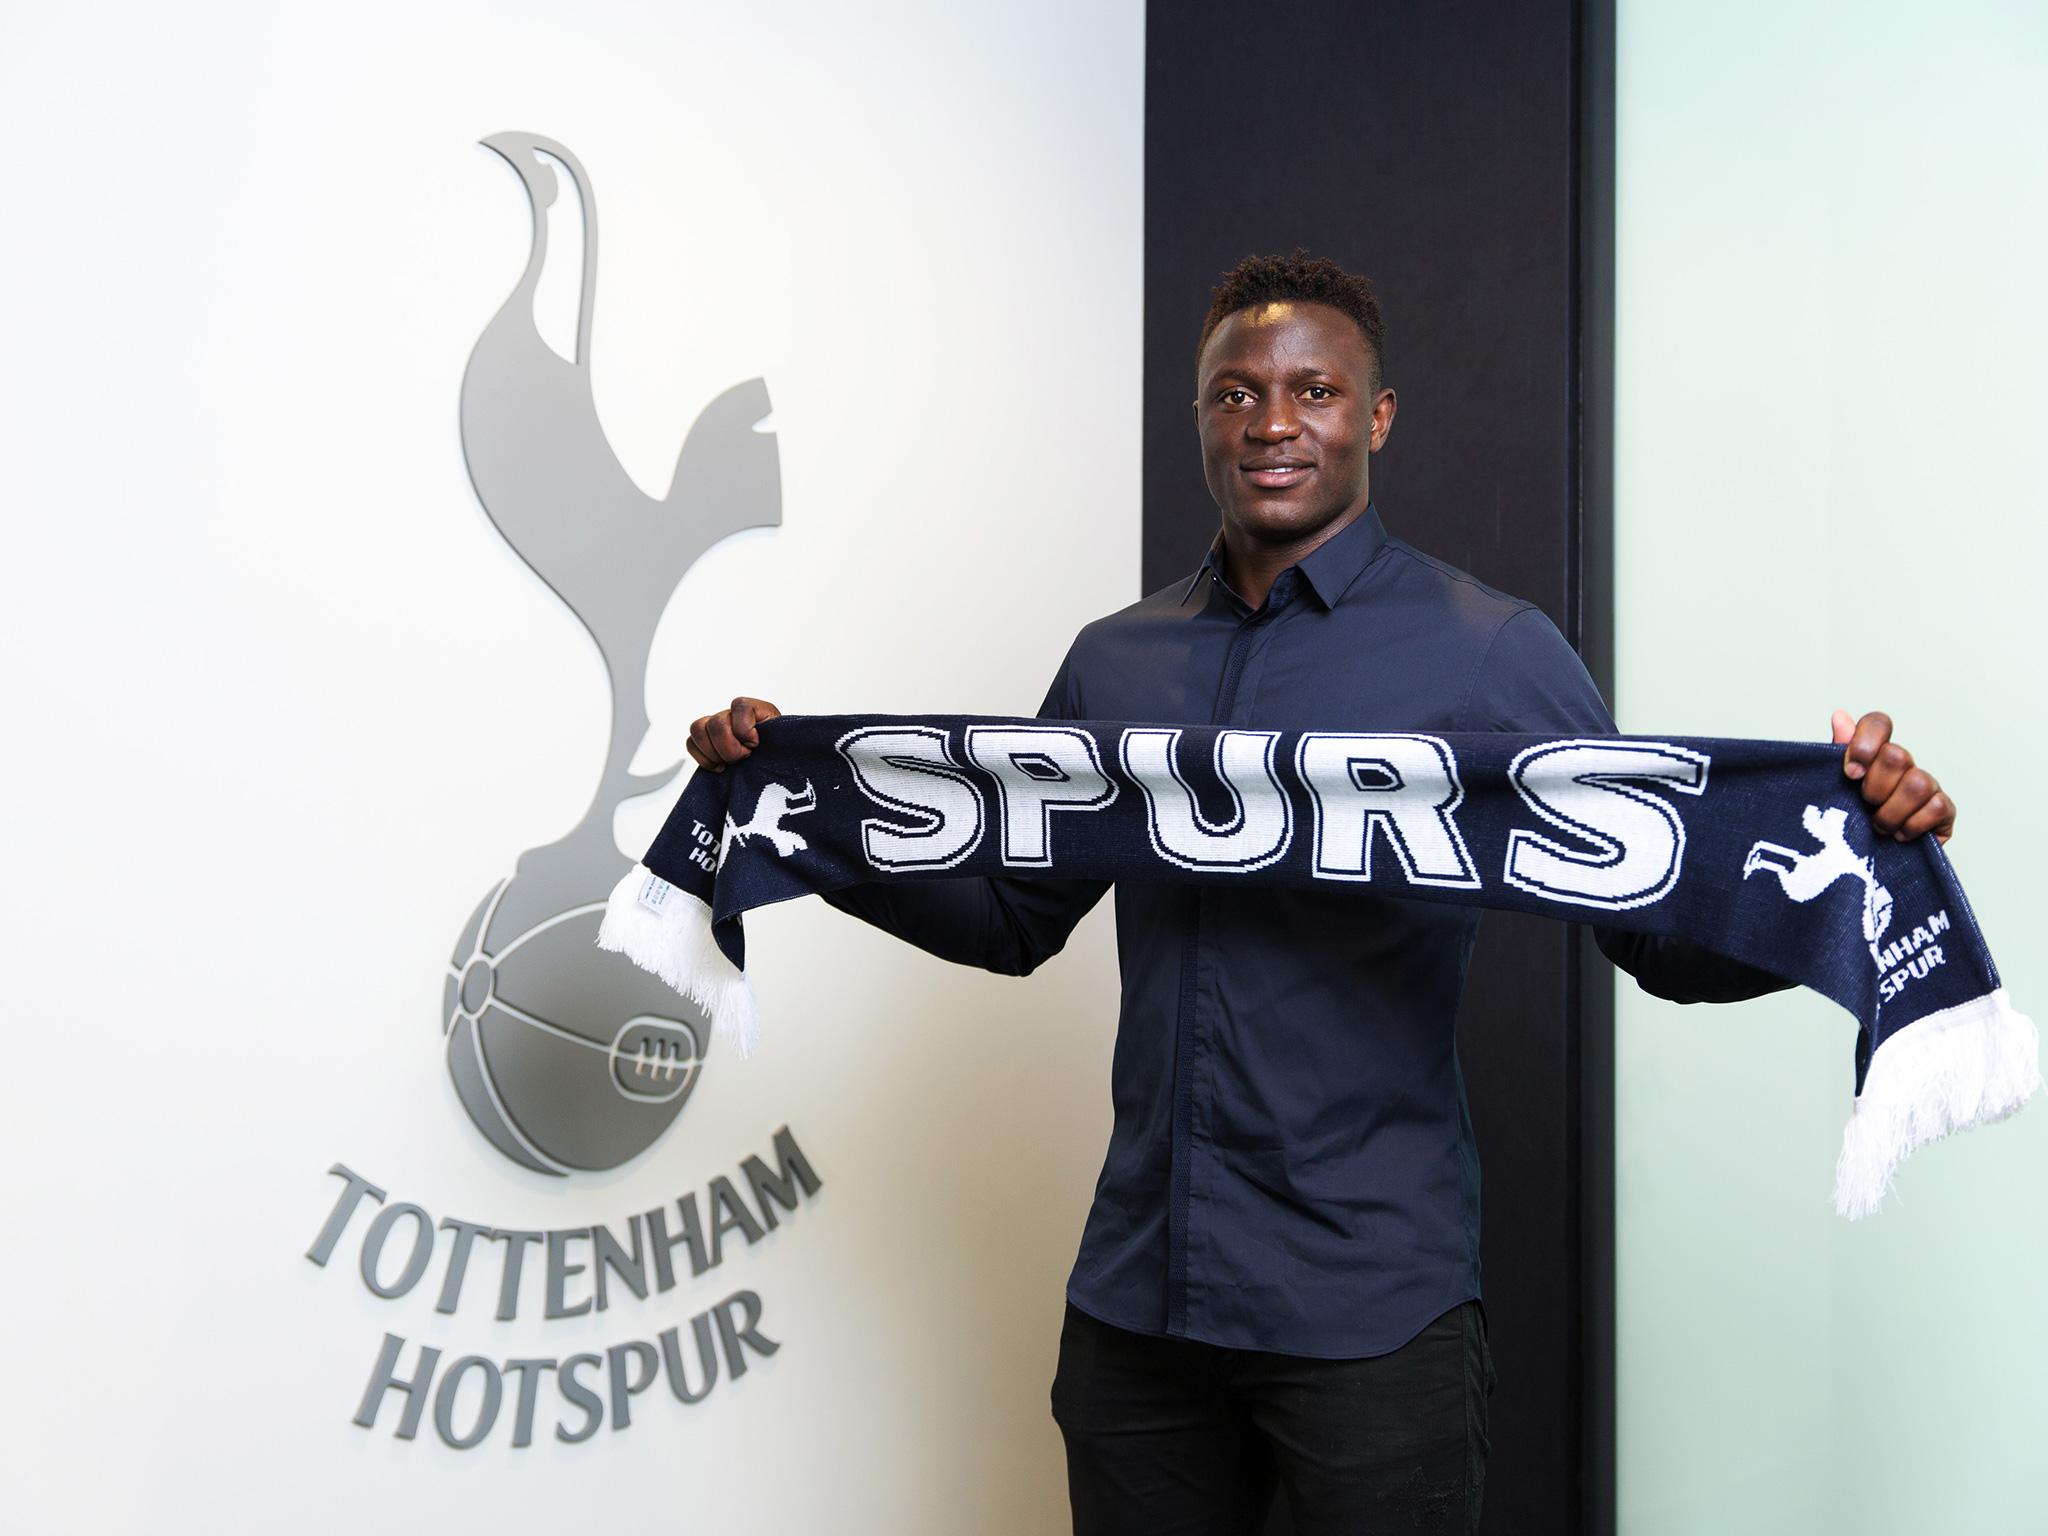 Wanyama has now completed his long-mooted move to White Hart Lane